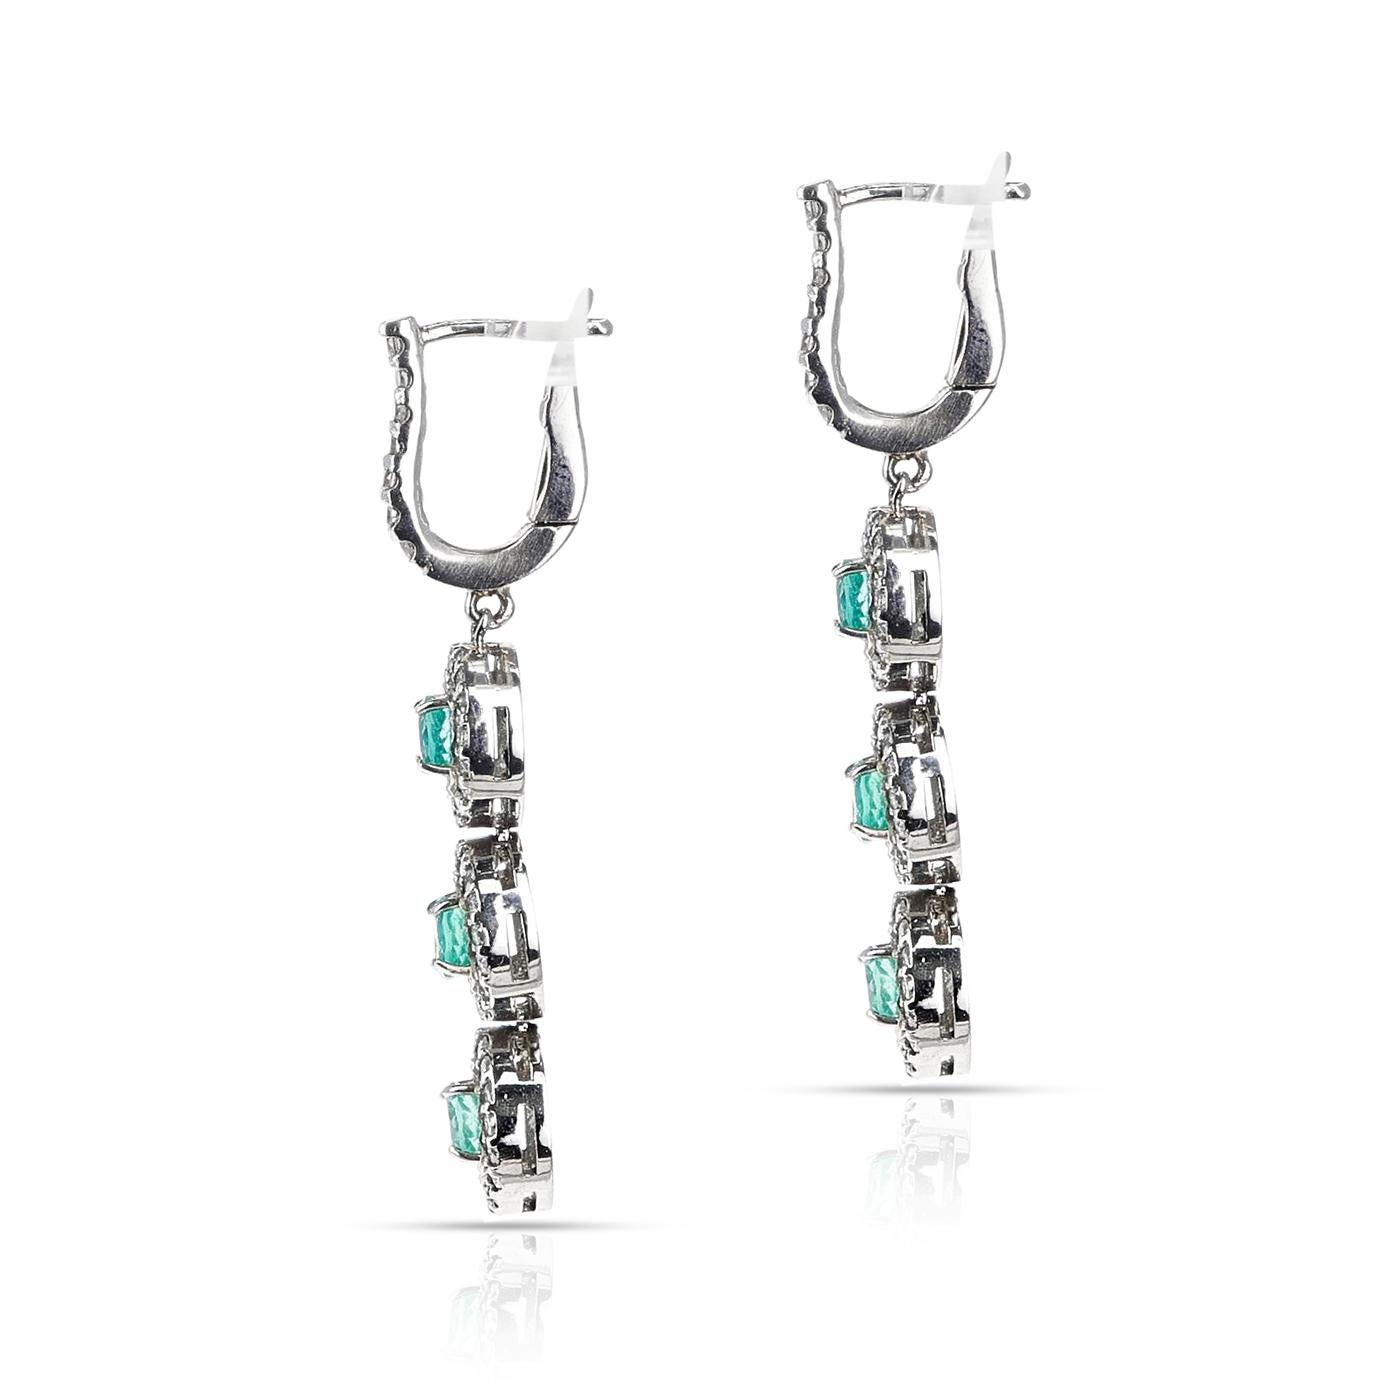 A pair of Three Round Emerald and Diamond Dangling Earrings made in 14 Karat White Gold. The weight of the diamonds is 1.25 carats. The length of the earrings is 1.50 inches. The total weight of the earrings is 6.95 grams. 